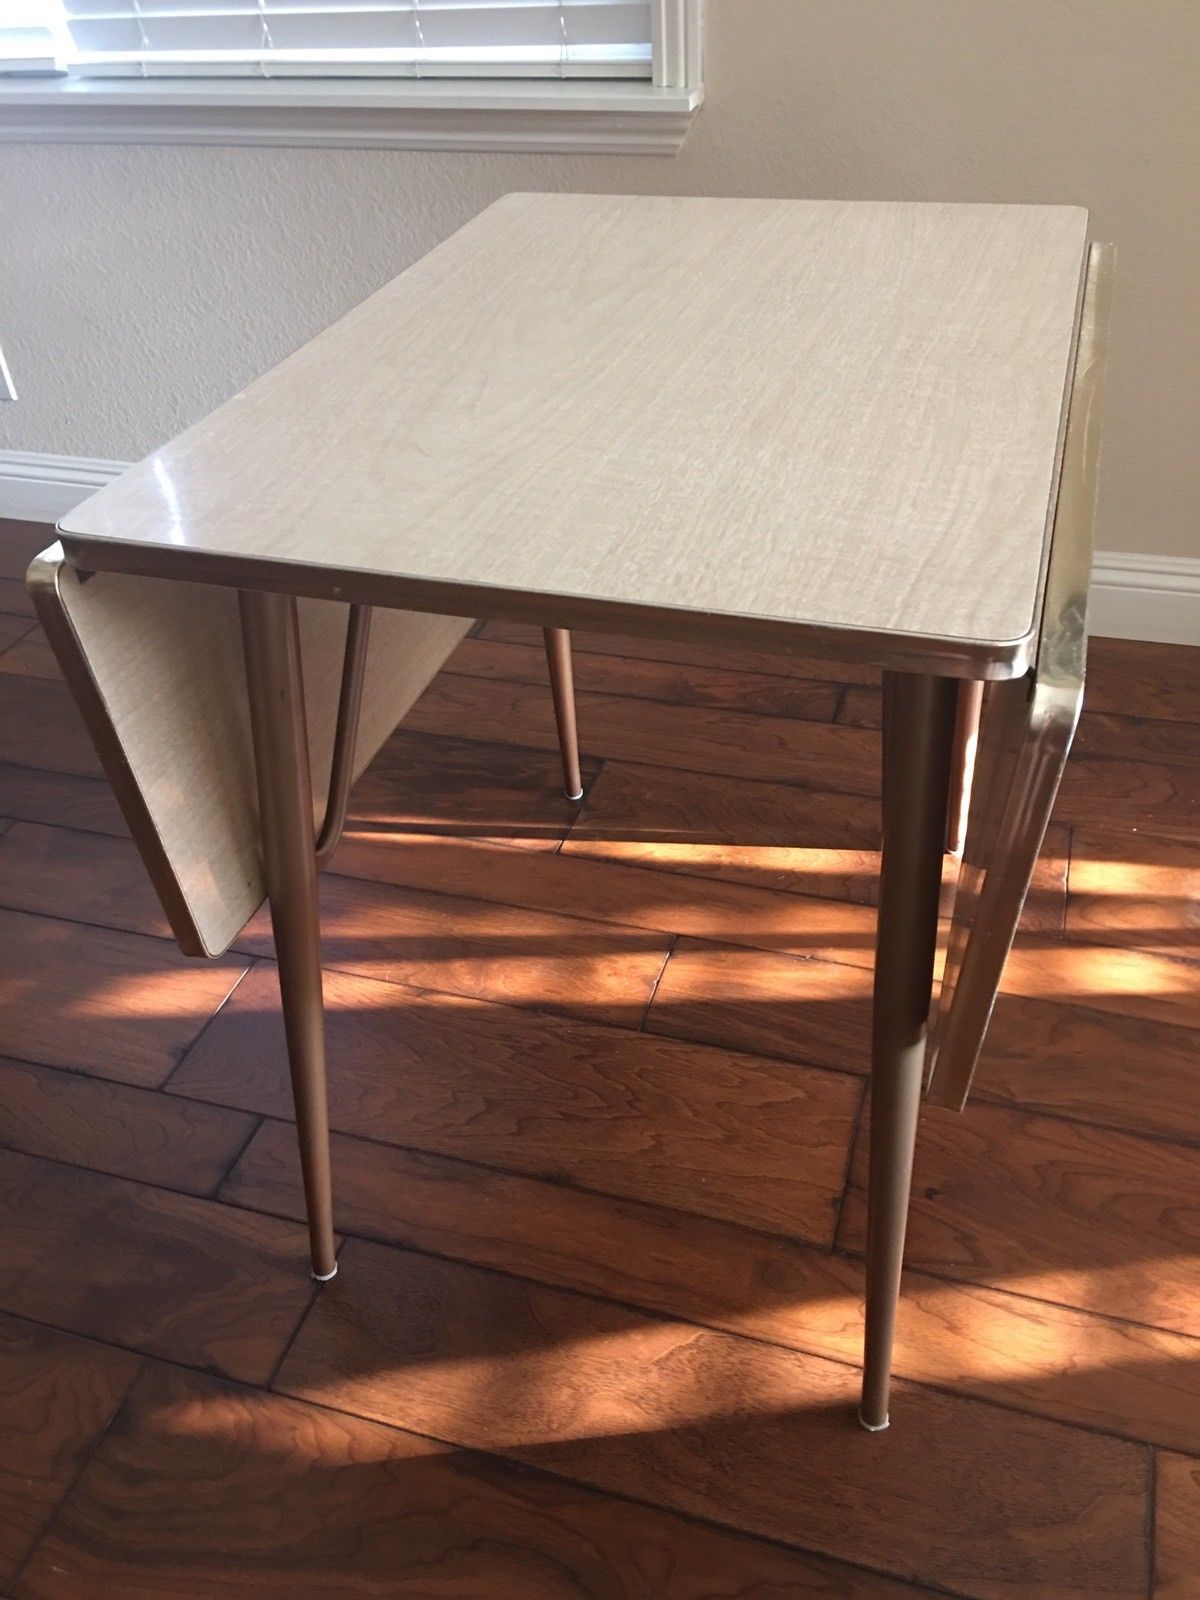 MID CENTURY MODERN DROP LEAF FORMICA DINETTE TABLE APARTMENT SIZE